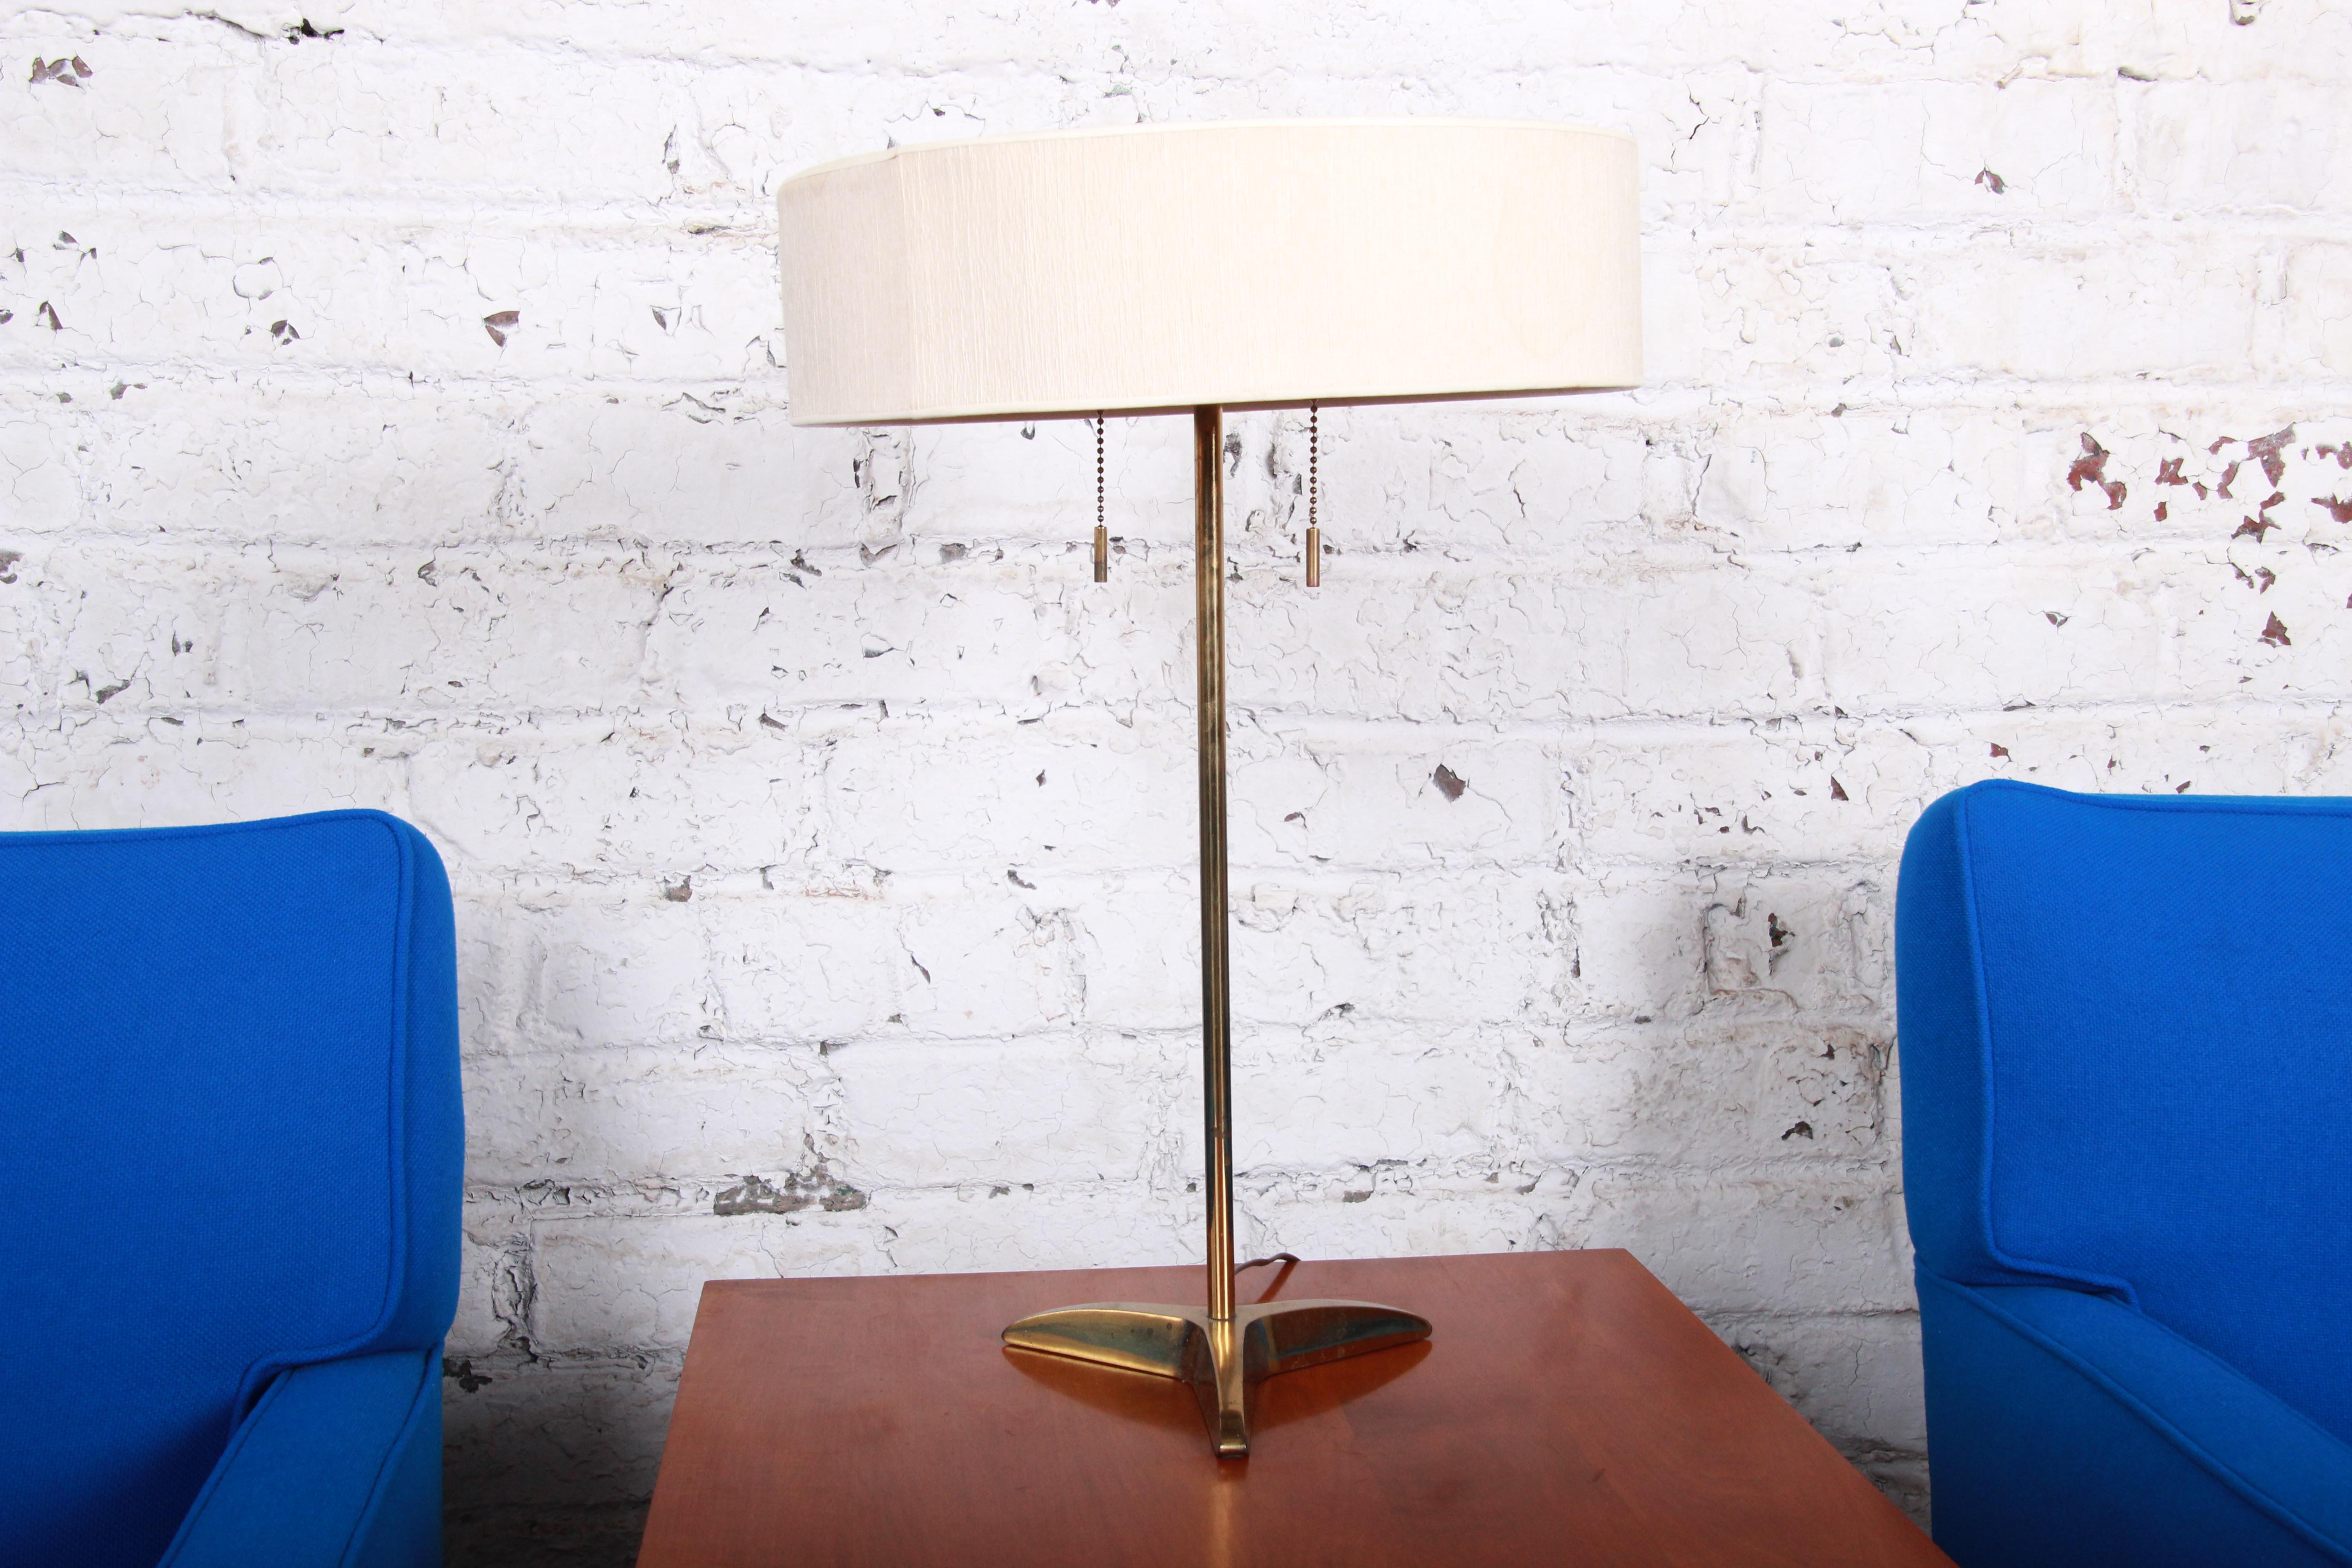 A gorgeous Paul McCobb style mid-century modern brass table lamp by Stiffel. Simple and elegant, with a three-pronged pedestal base and original round lamp shade with tassel pulls. The original Stiffel label is present. The lamp is in good working